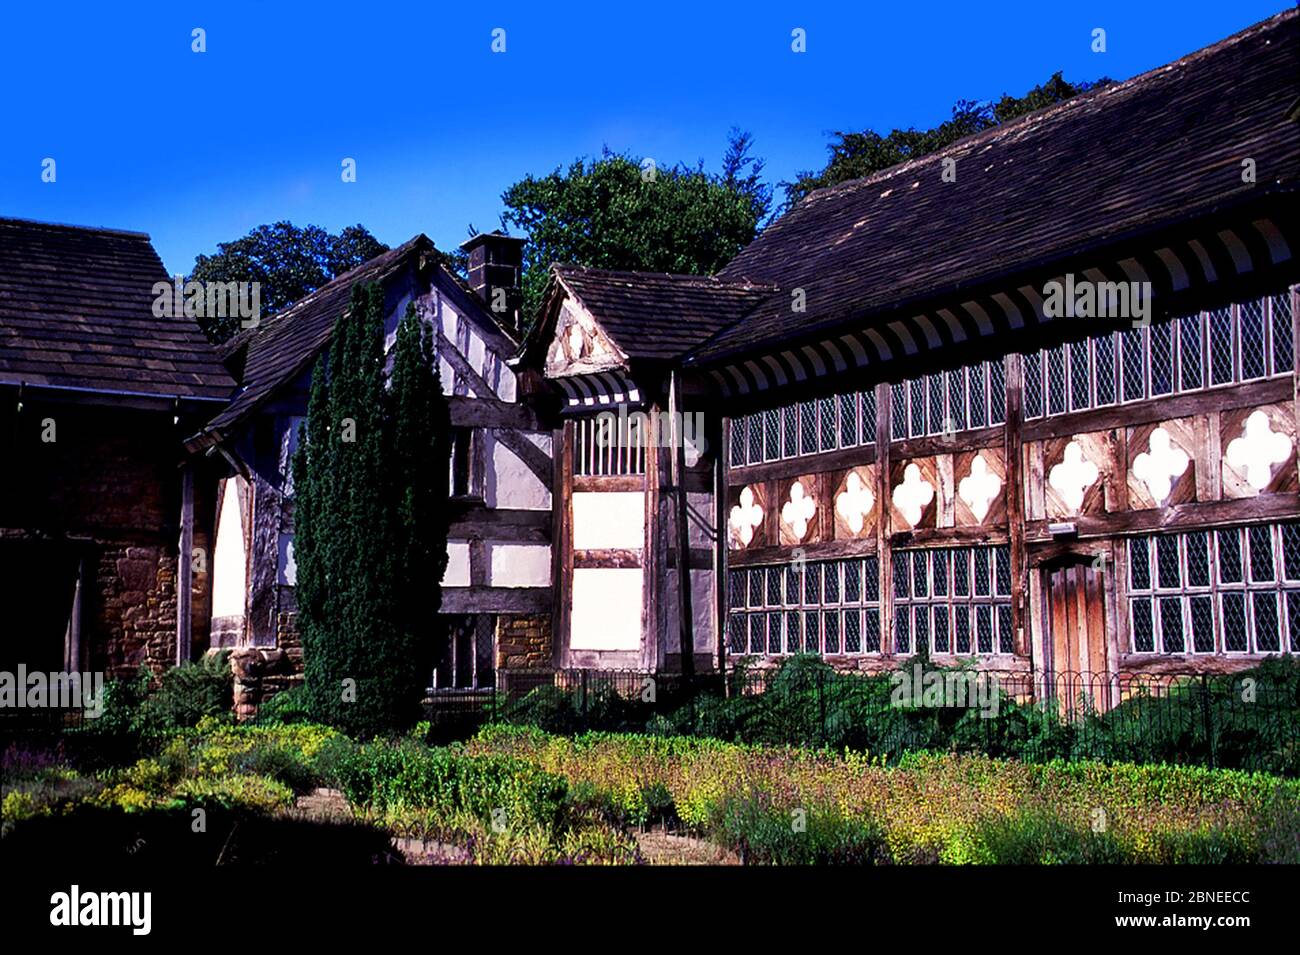 Smithills Hall is a Grade I listed manor house, and a scheduled, monument in Smithills, Bolton,England. It is owned by the people and free to enter Stock Photo